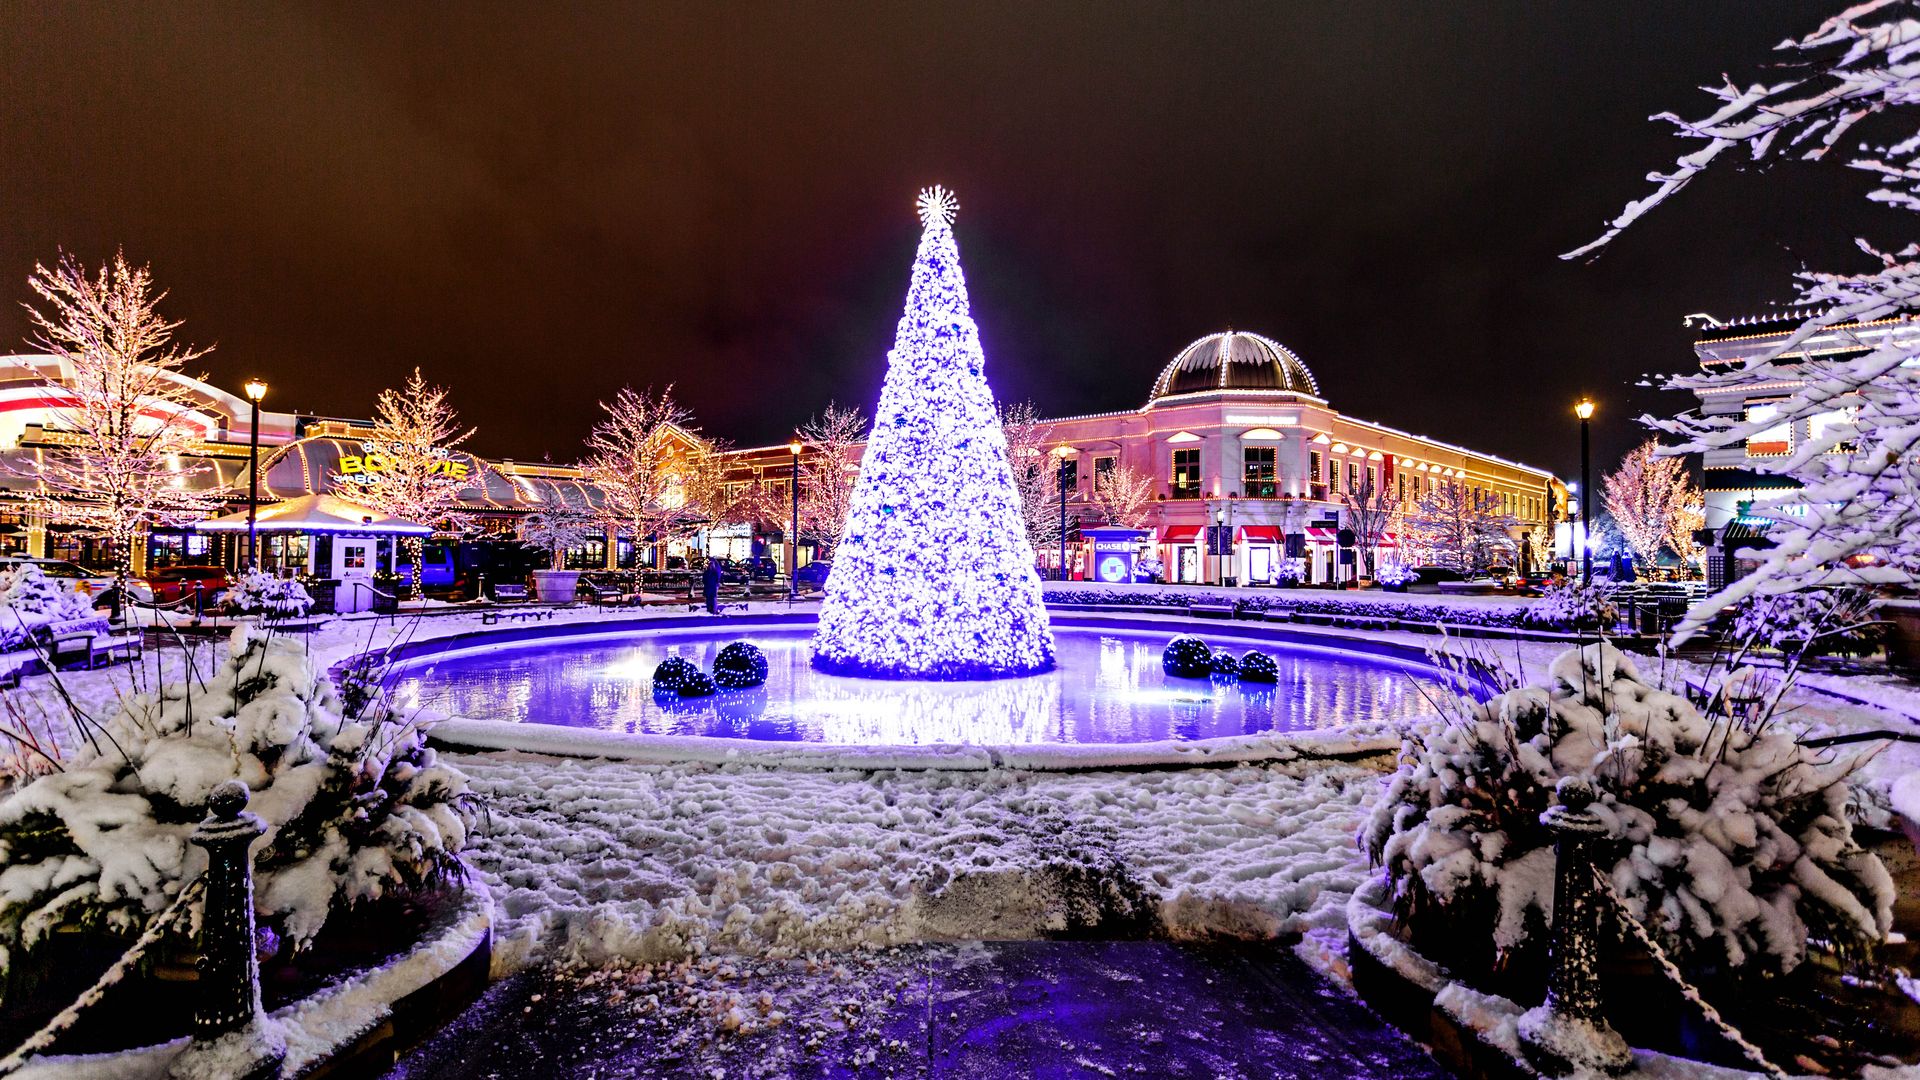 A lit Christmas tree in the center of a fountain, with the surrounding area covered in lights and snow